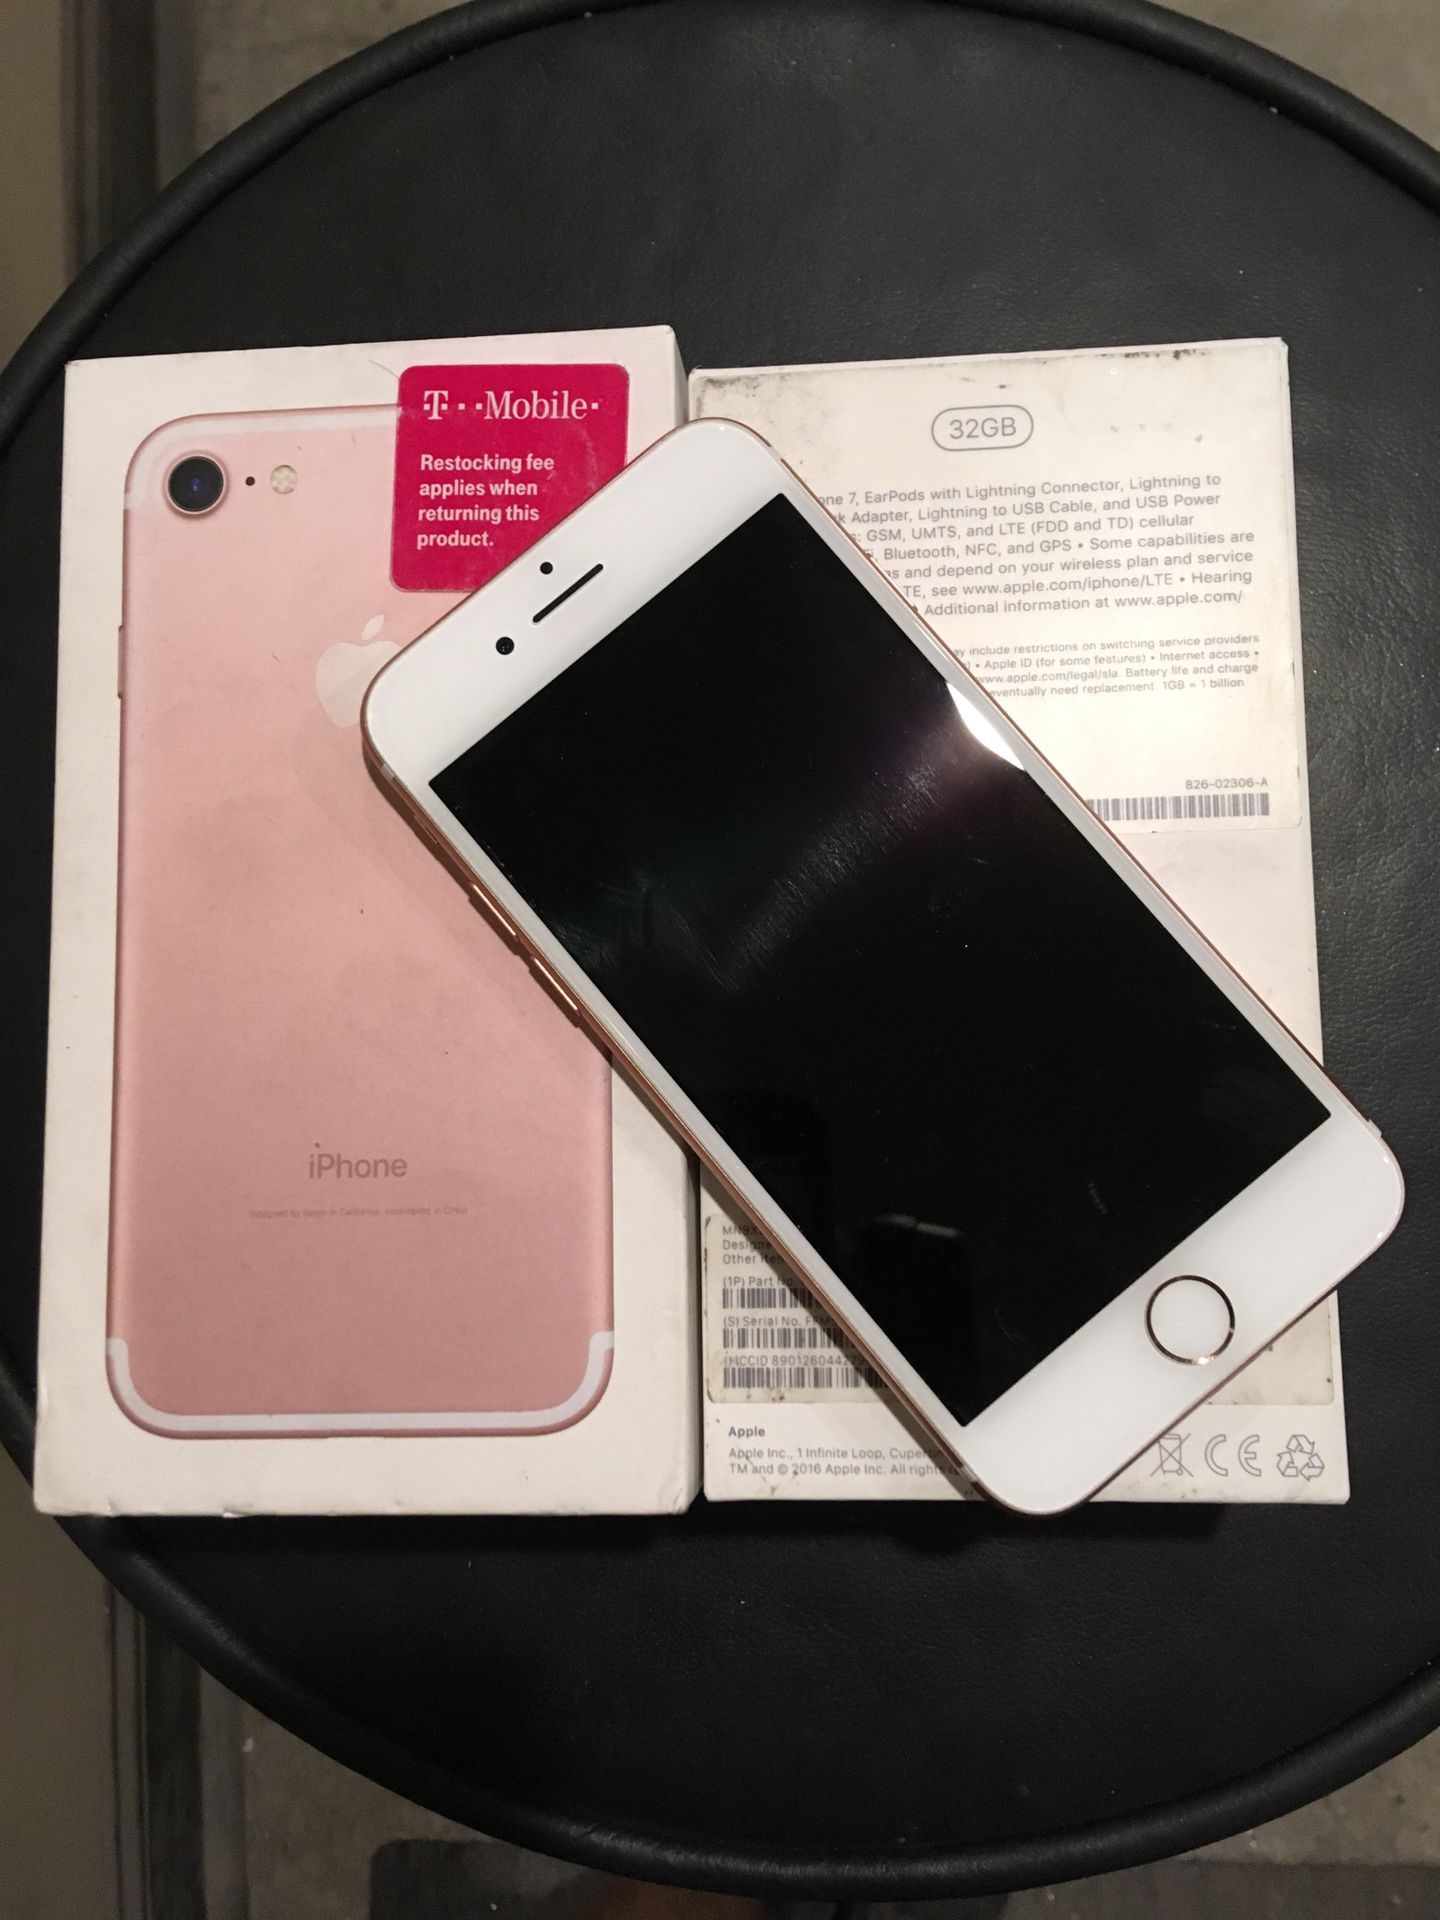 iphome 7 rose gold used less than 2 weeks $525 obo cash gets it